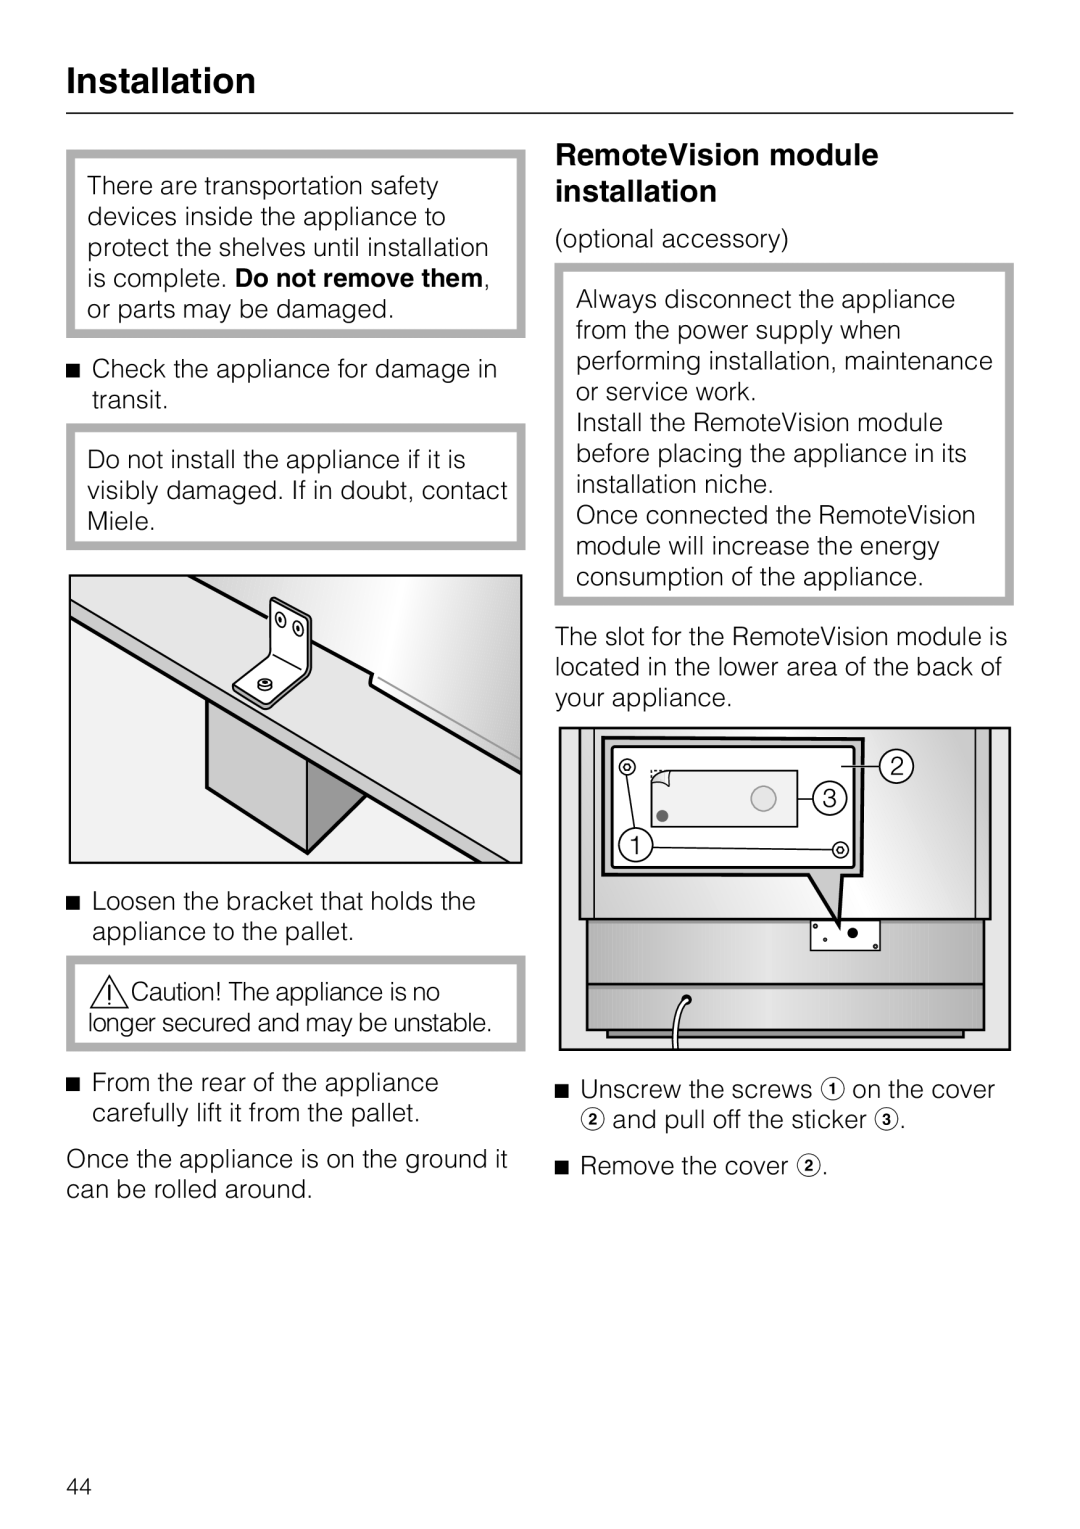 Miele KWT 1601 SF, KWT 1611 SF installation instructions RemoteVision module installation, Installation 